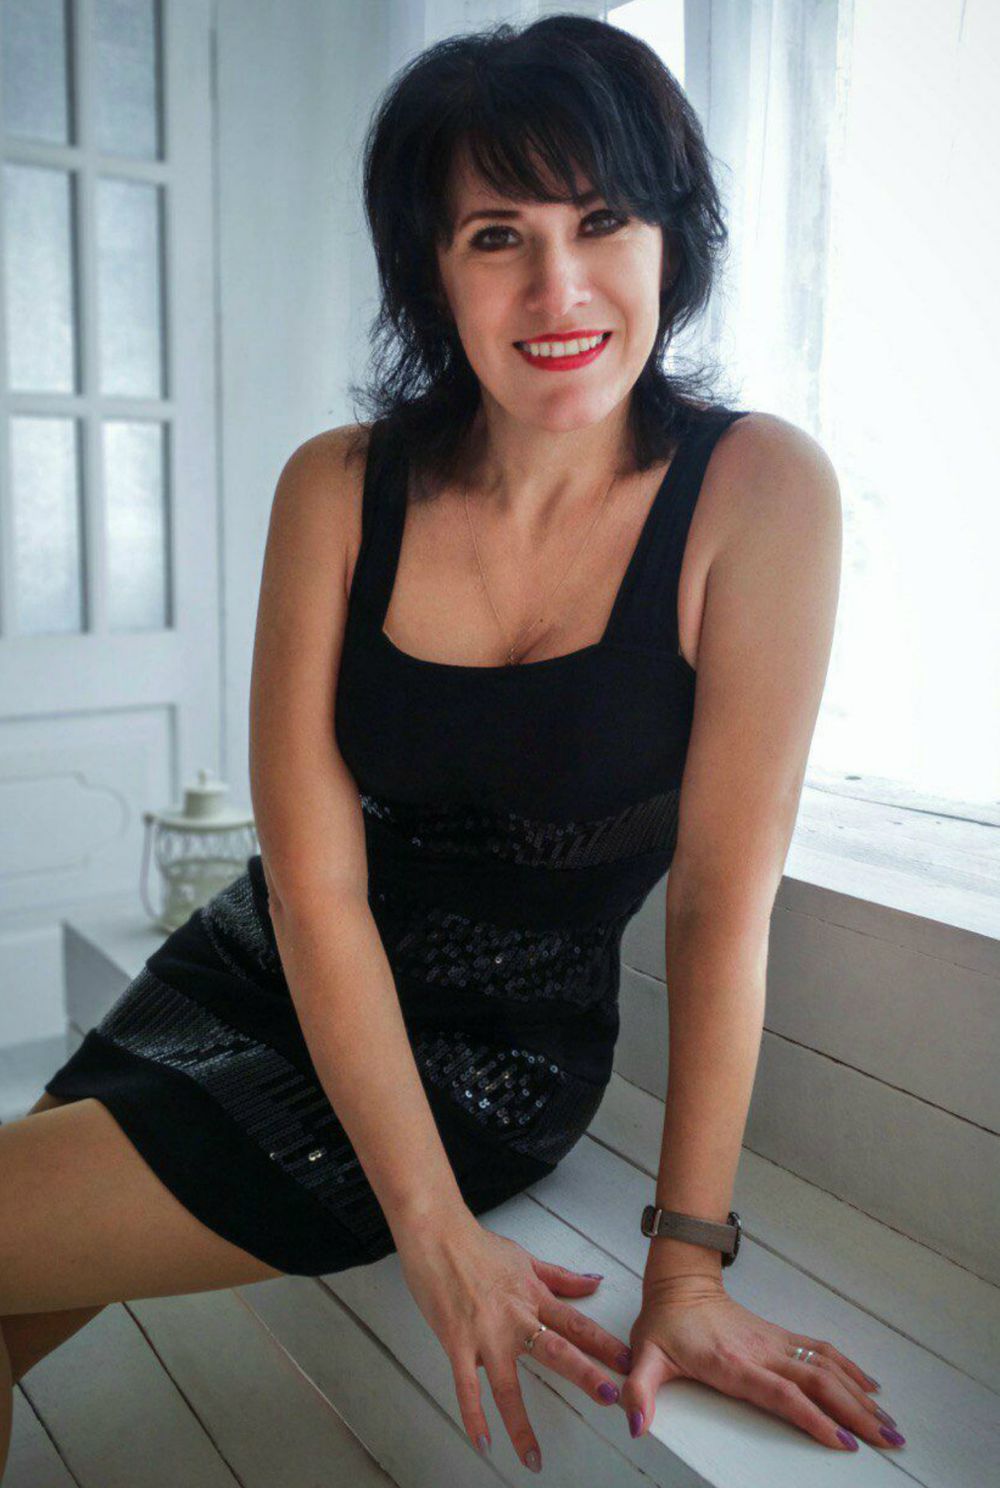 PlayGirl00 ID 190849 From Kherson Ukraine 53 Years Old Brown Eyes